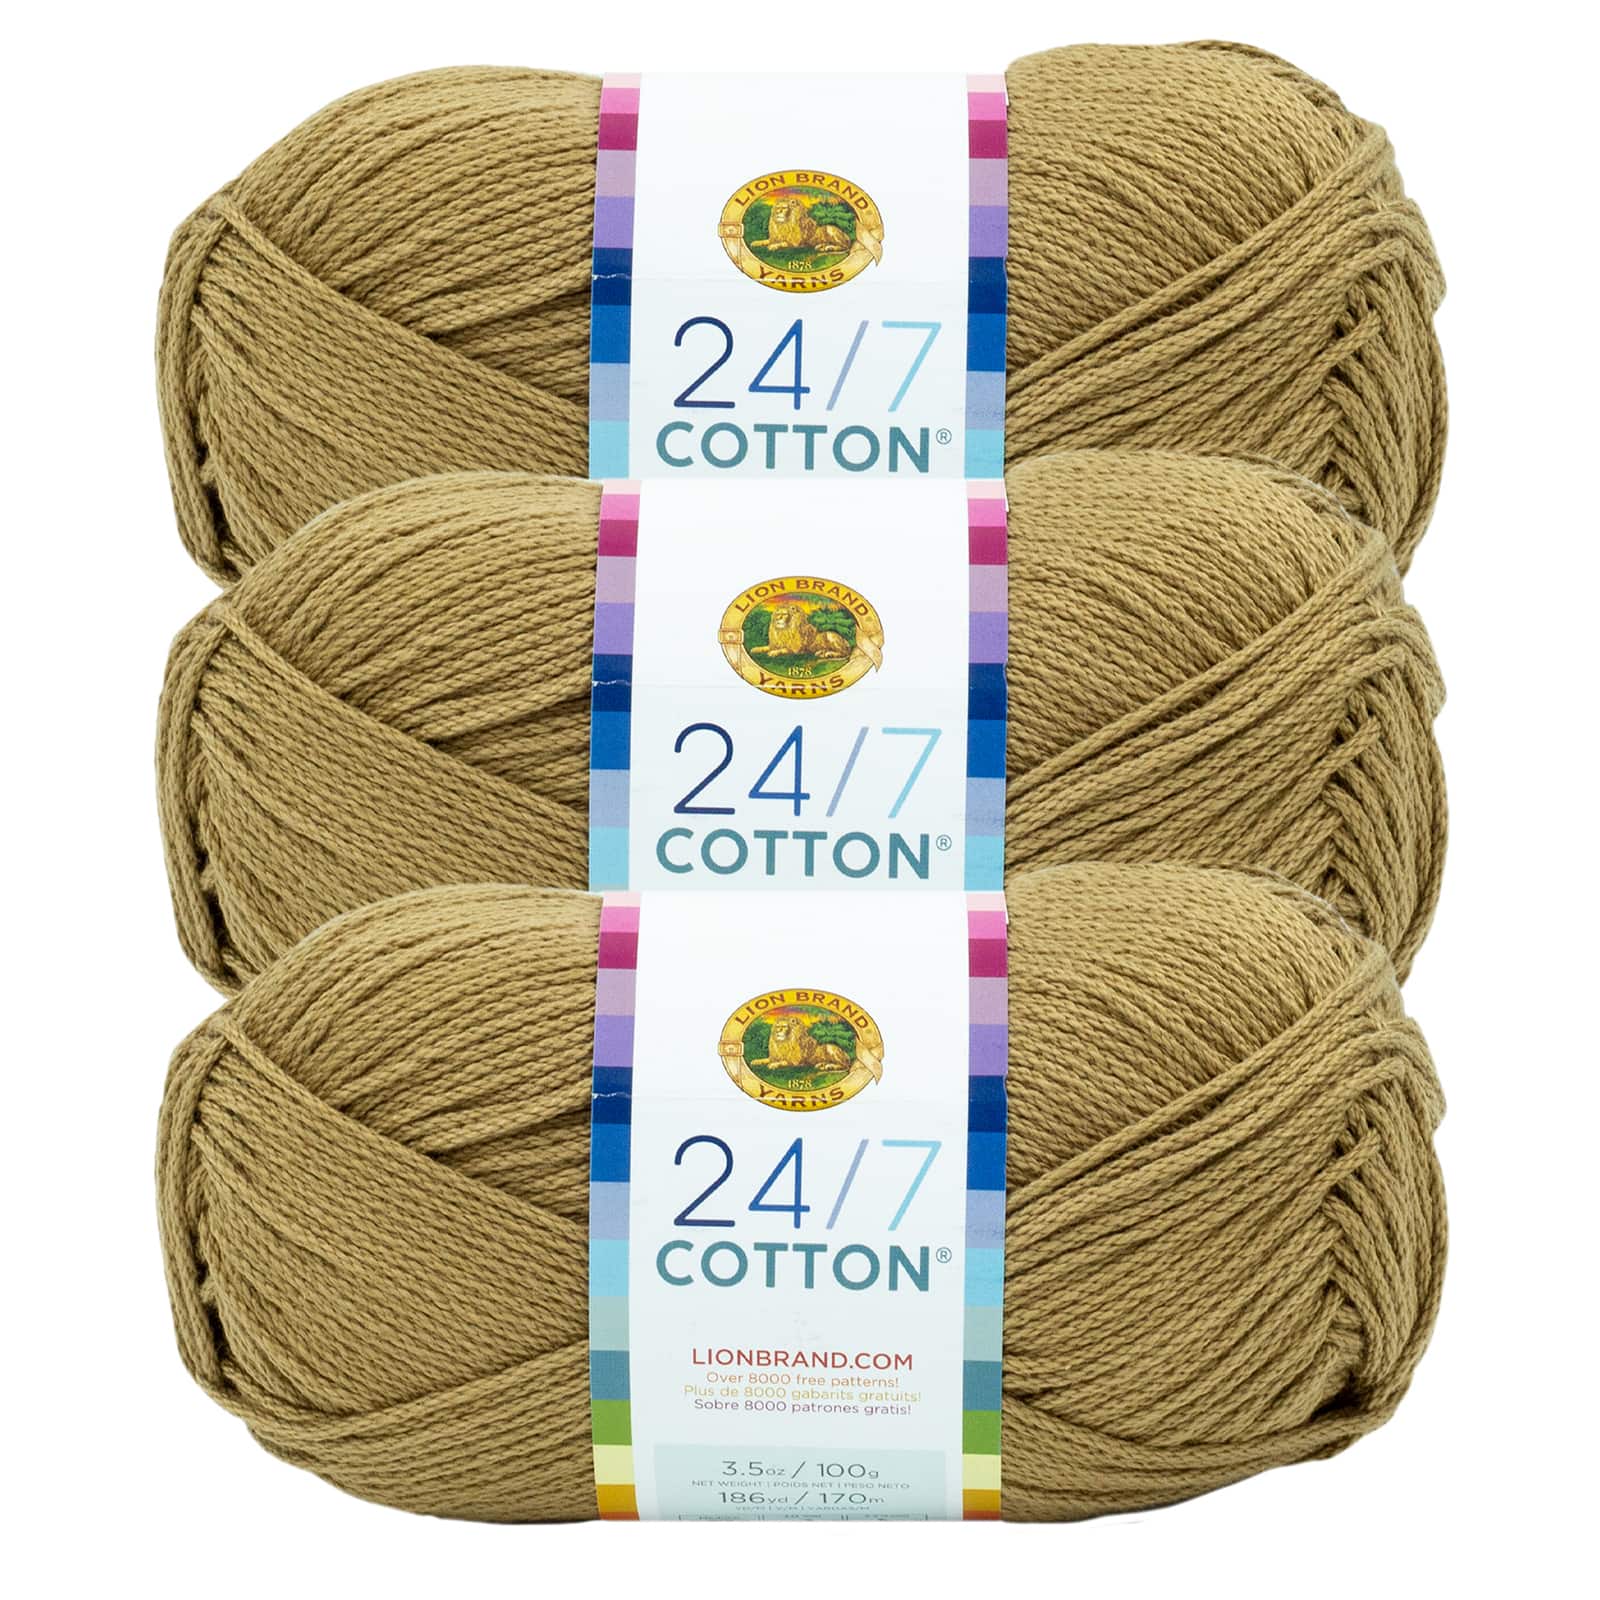 Cotton Yarns Perfect for Spring and Summer, 24/7 Cotton by Lion